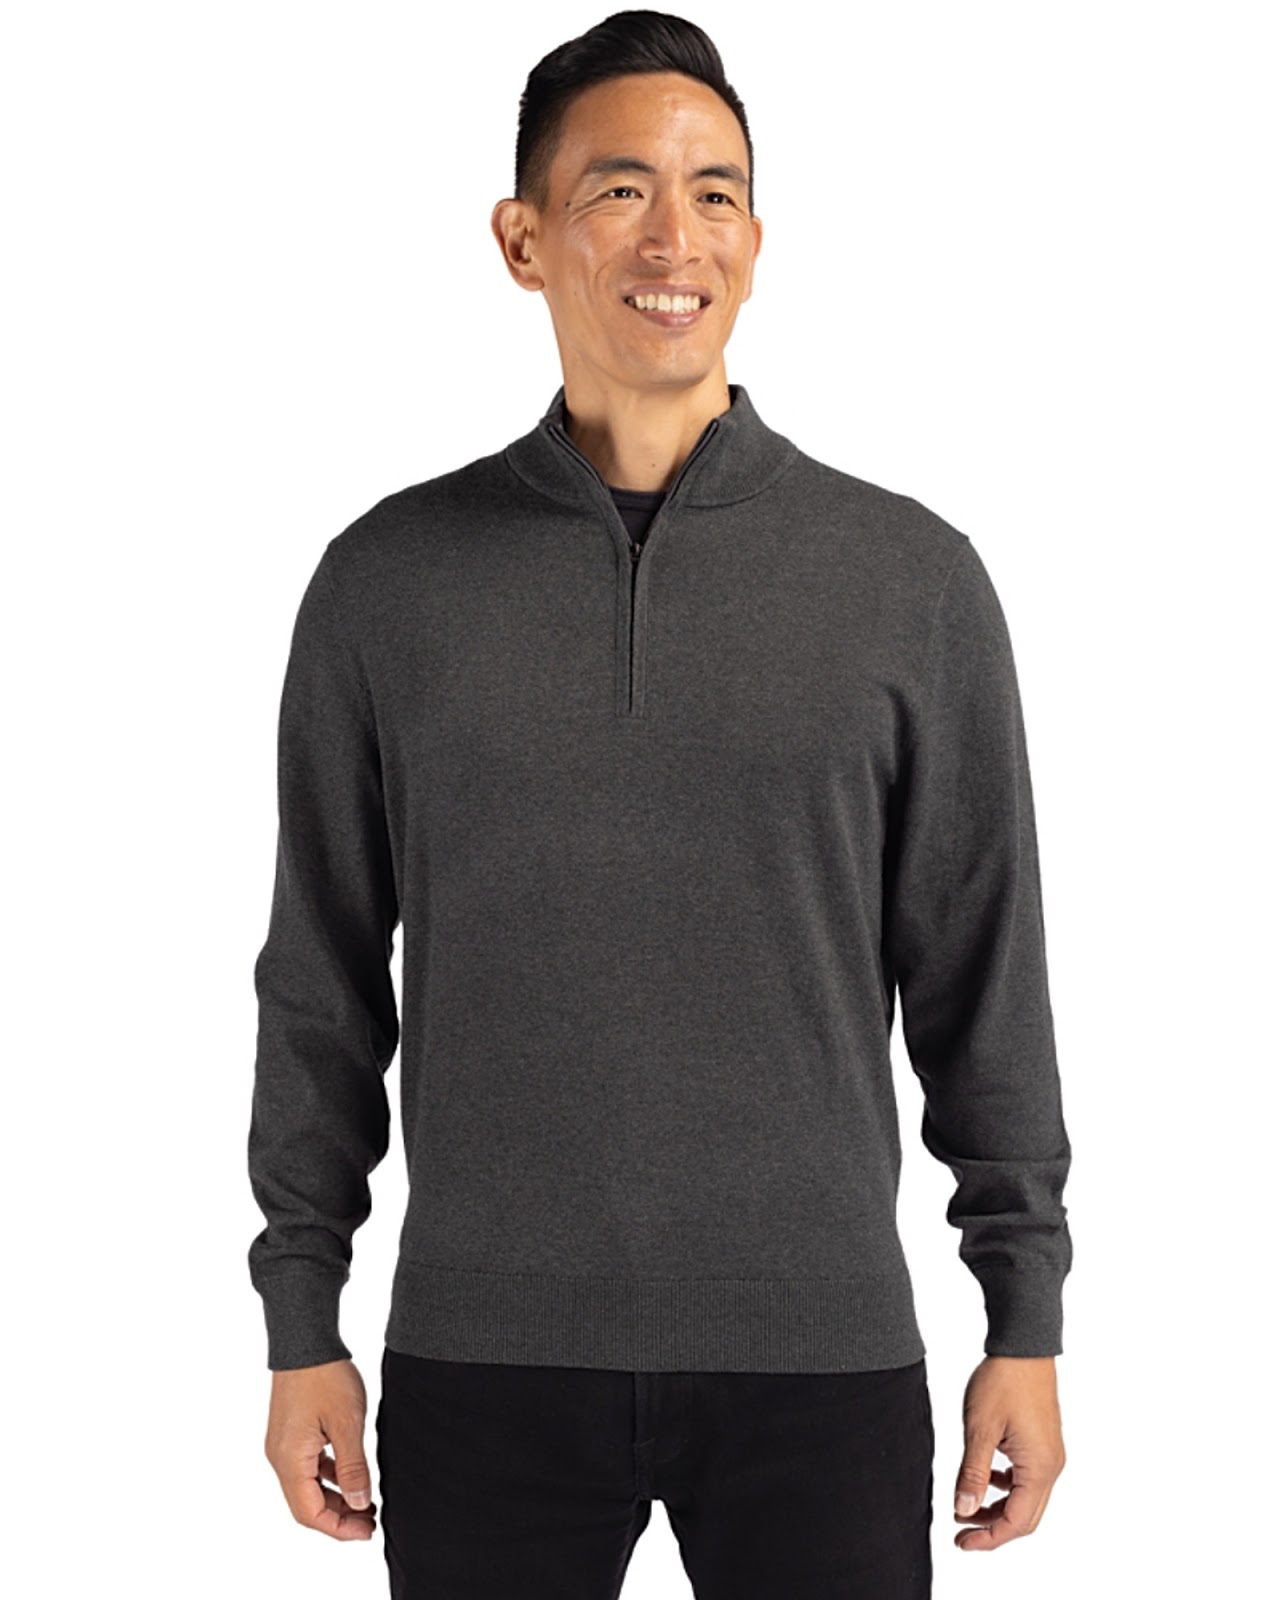 Man wearing Cutter & Buck Lakemont Tri-Blend Mens Big and Tall Quarter Zip Pullover Sweater in Charcoal Heather/Dark Grey